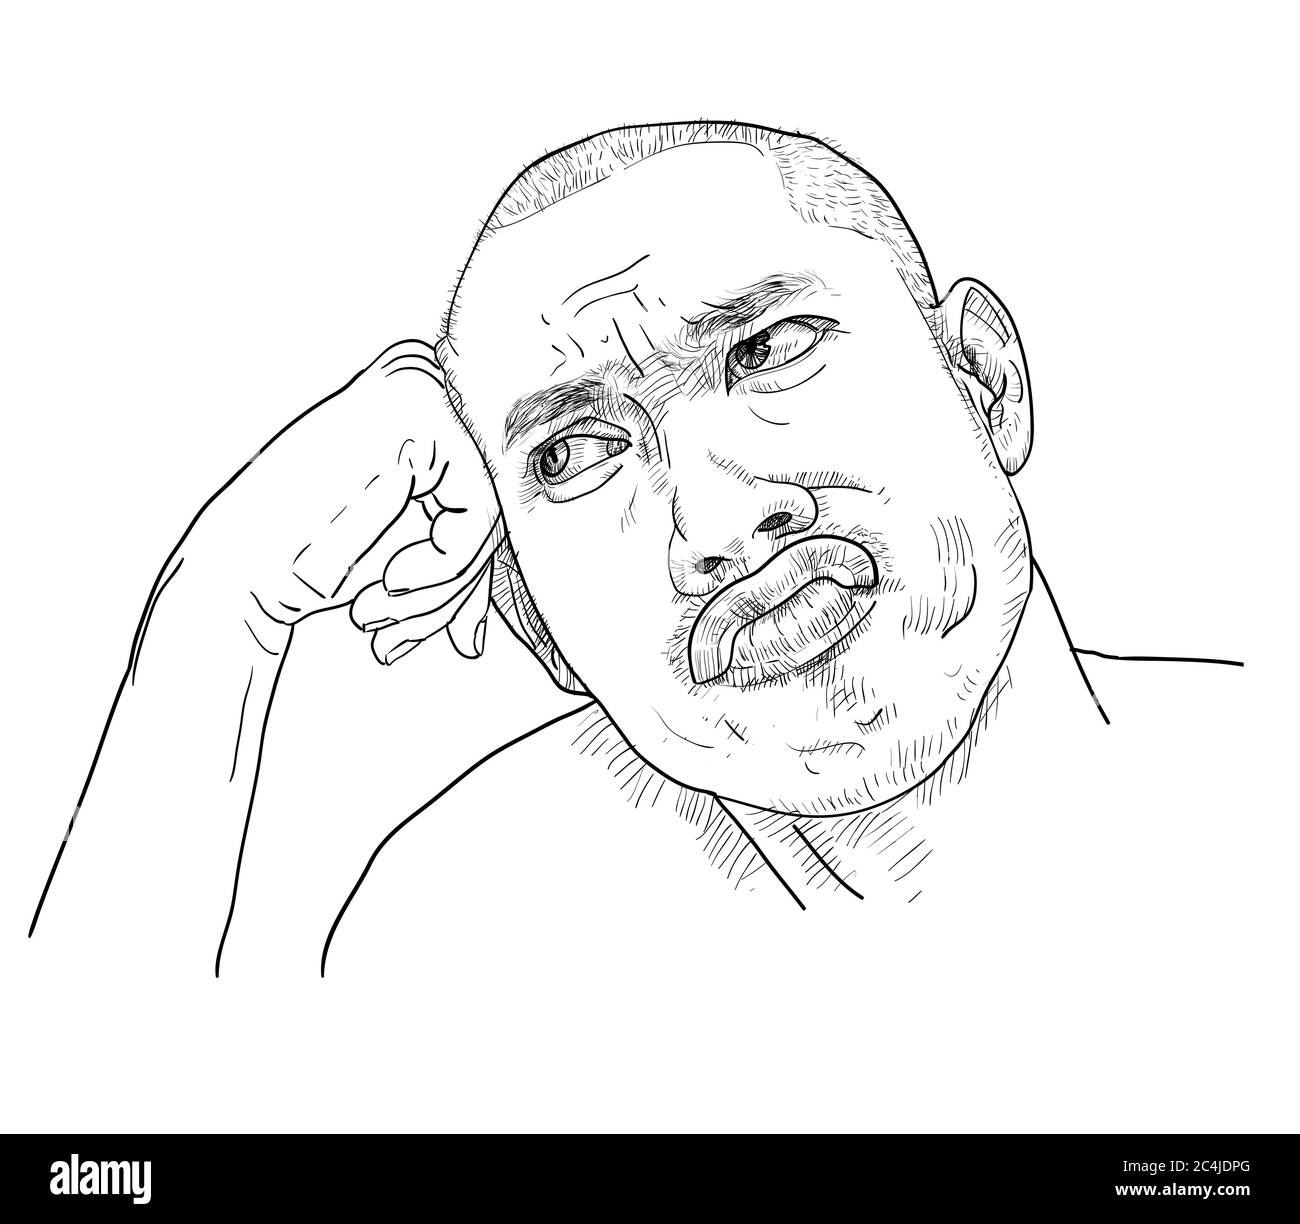 Drawing funny portrait of a man, wondering and thinking facial expressions and pose. Vector illustration. Stock Vector